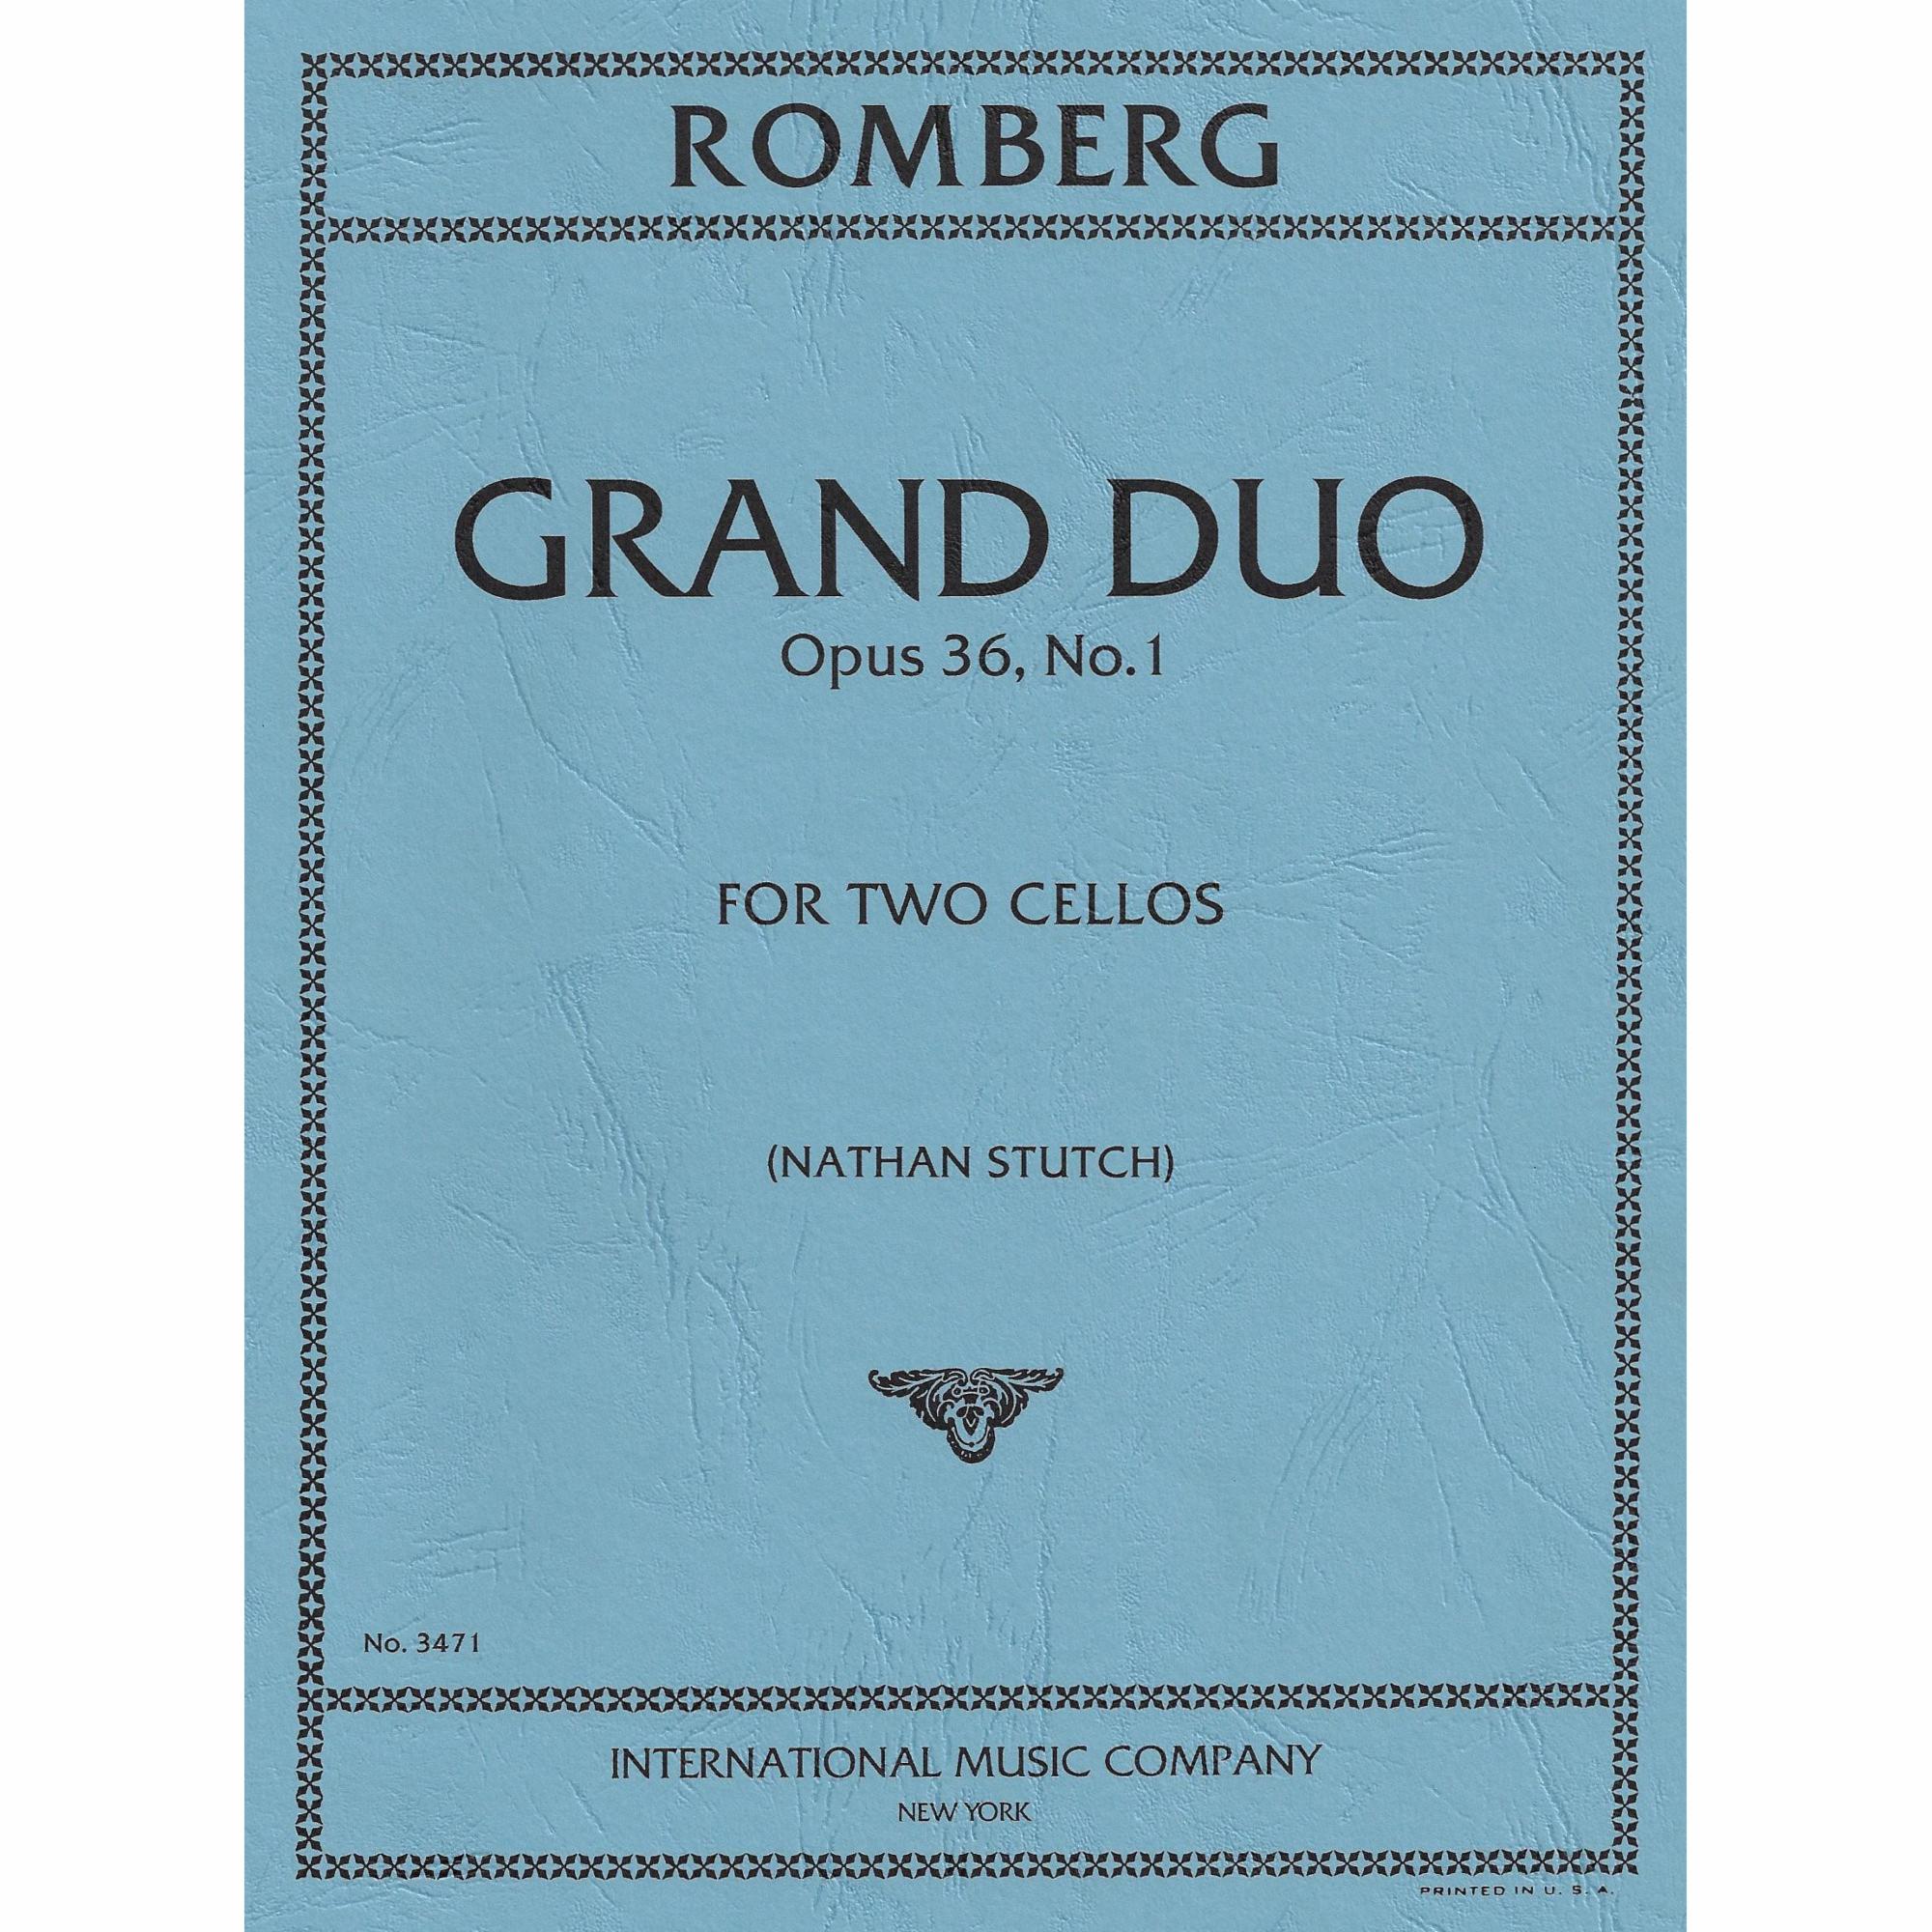 Romberg -- Grand Duo, Op. 36, No. 1 for Two Cellos